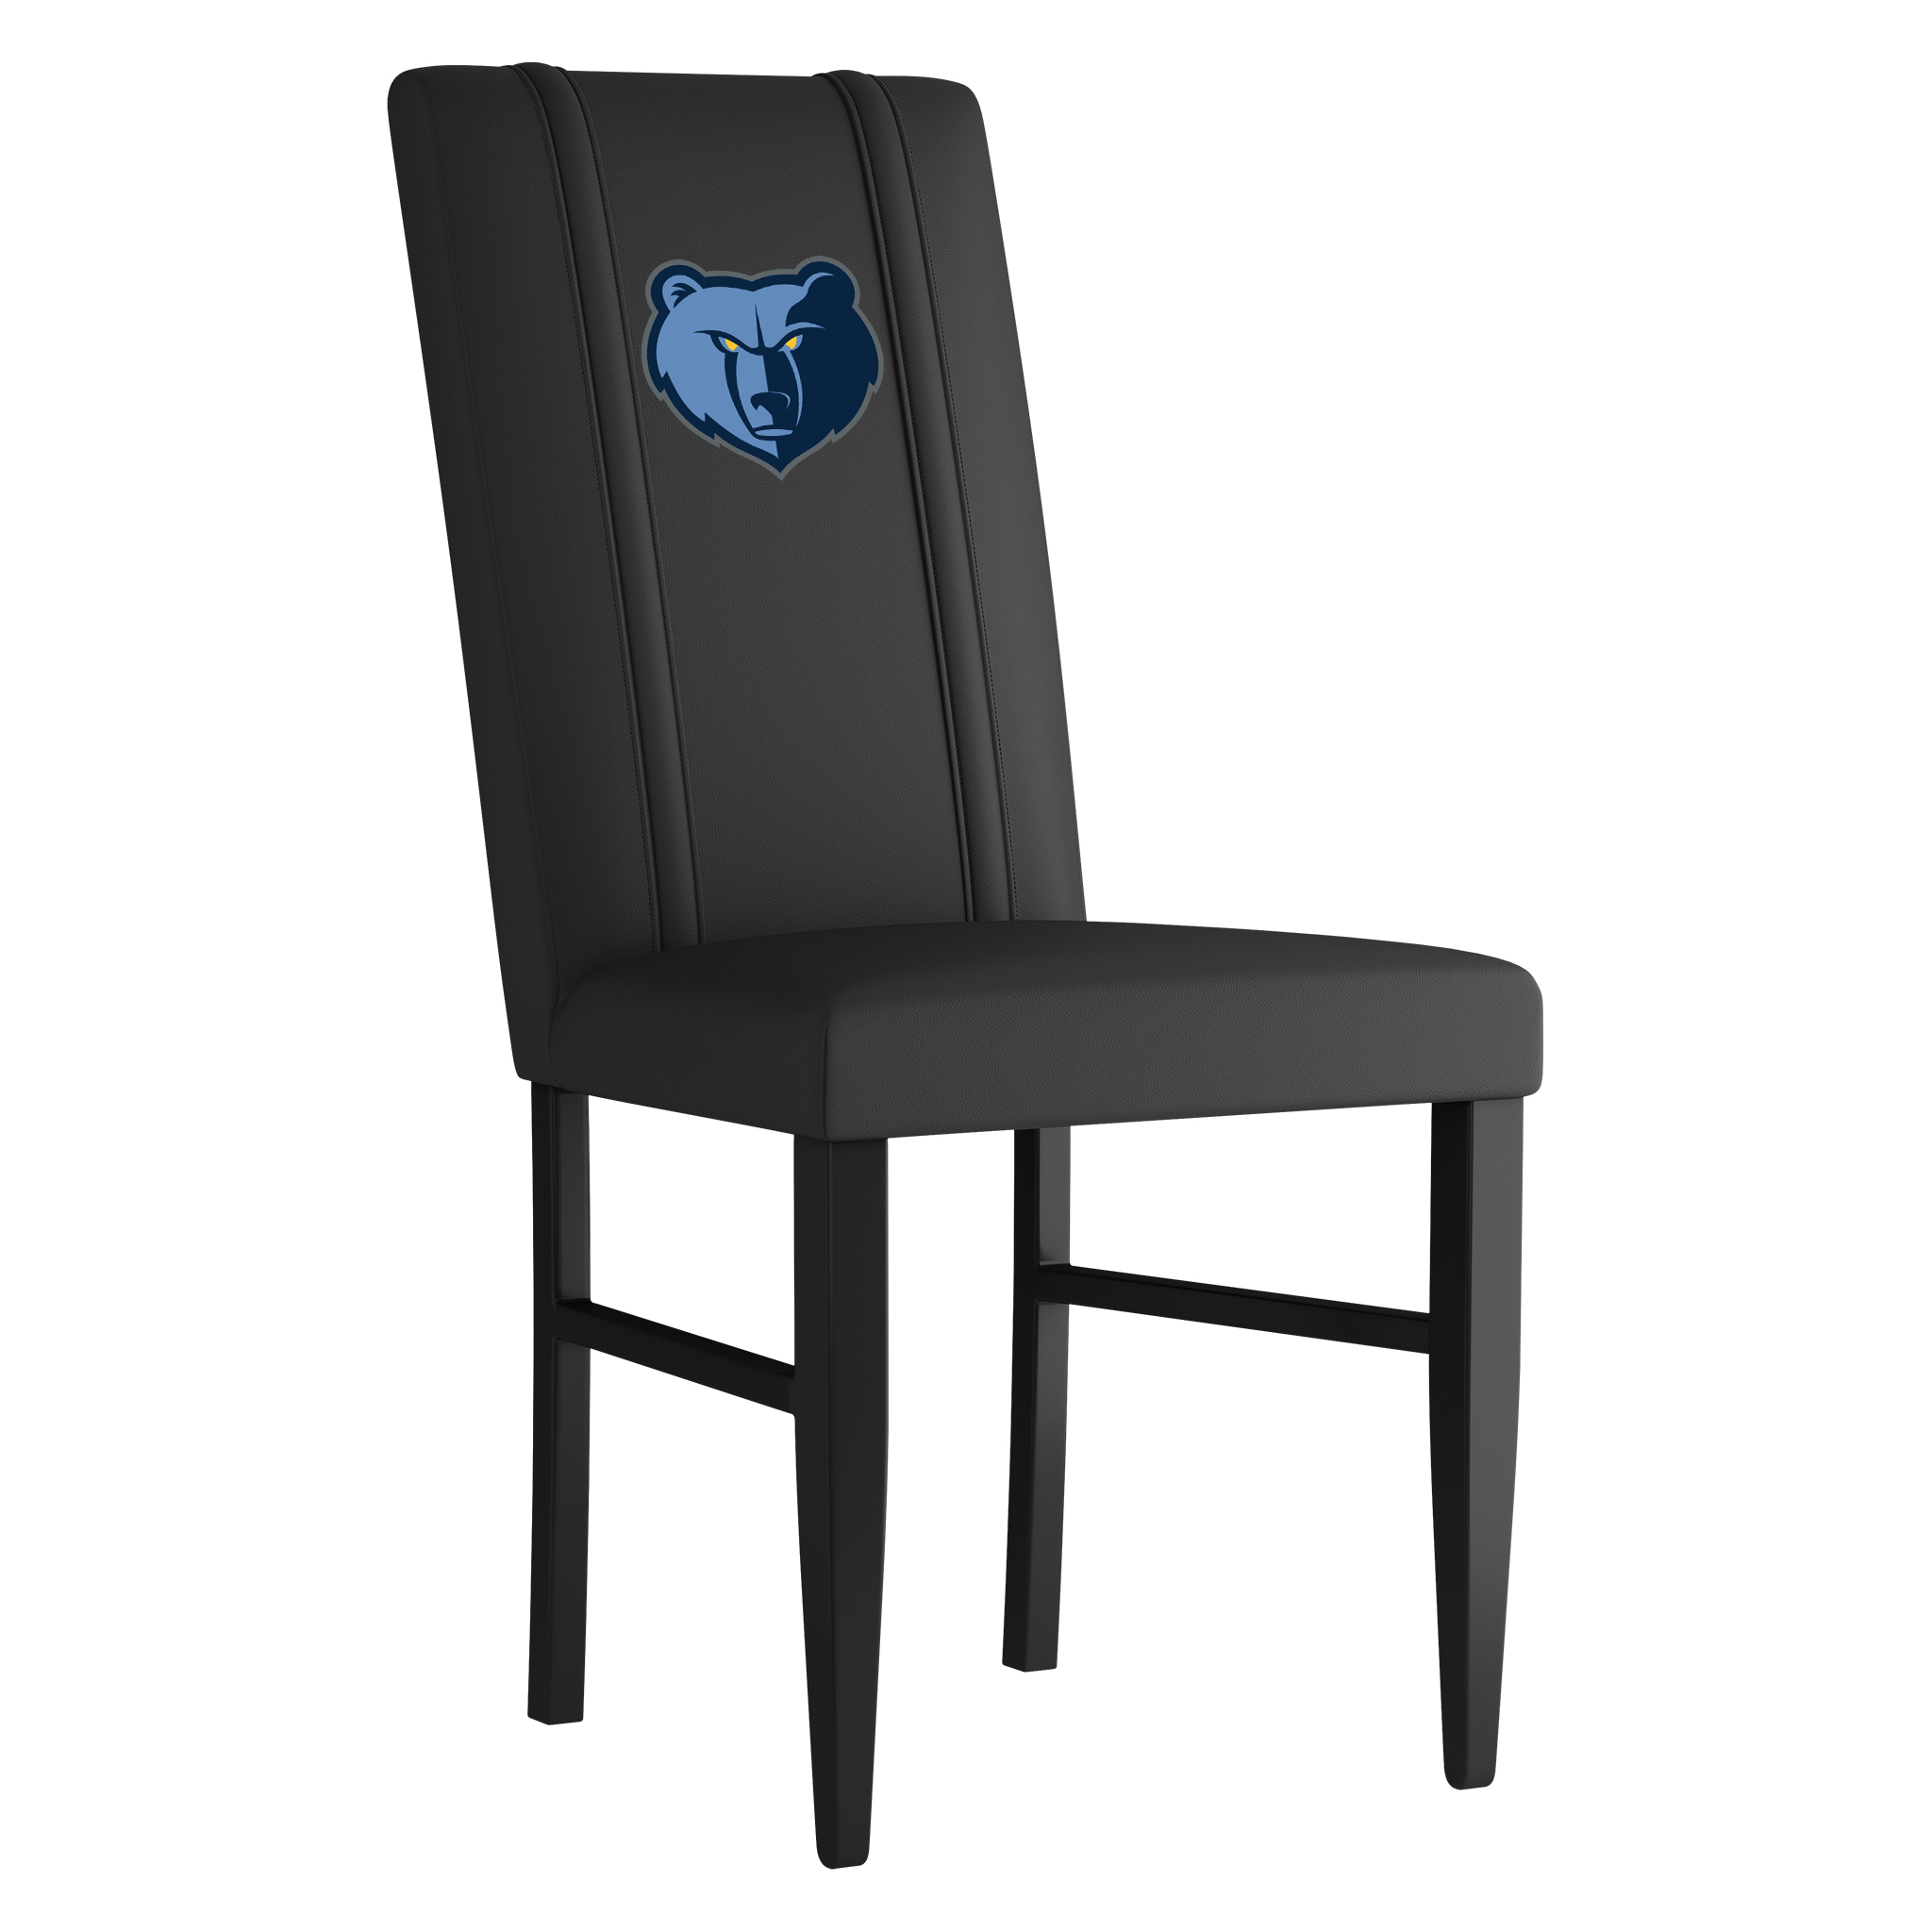 Memphis Grizzlies Side Chair 2000 With Memphis Grizzlies Primary Logo